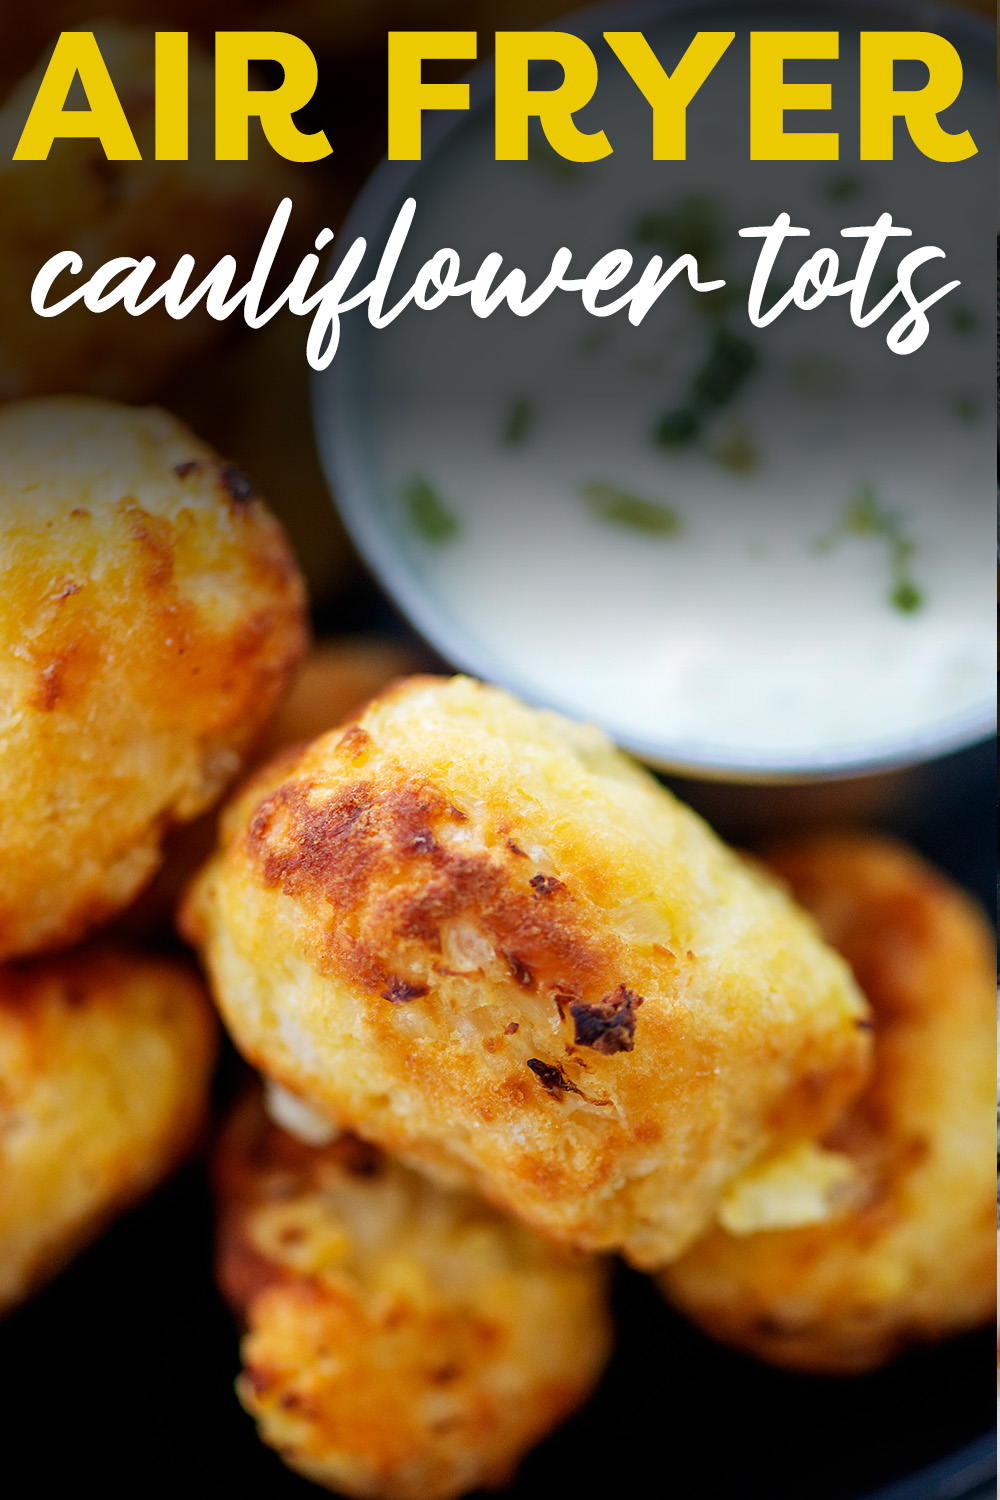 Cauliflower tots are a low carb version of our favorite childhood side dish!  They are simple to make in the air fryer and come out plenty crispy!